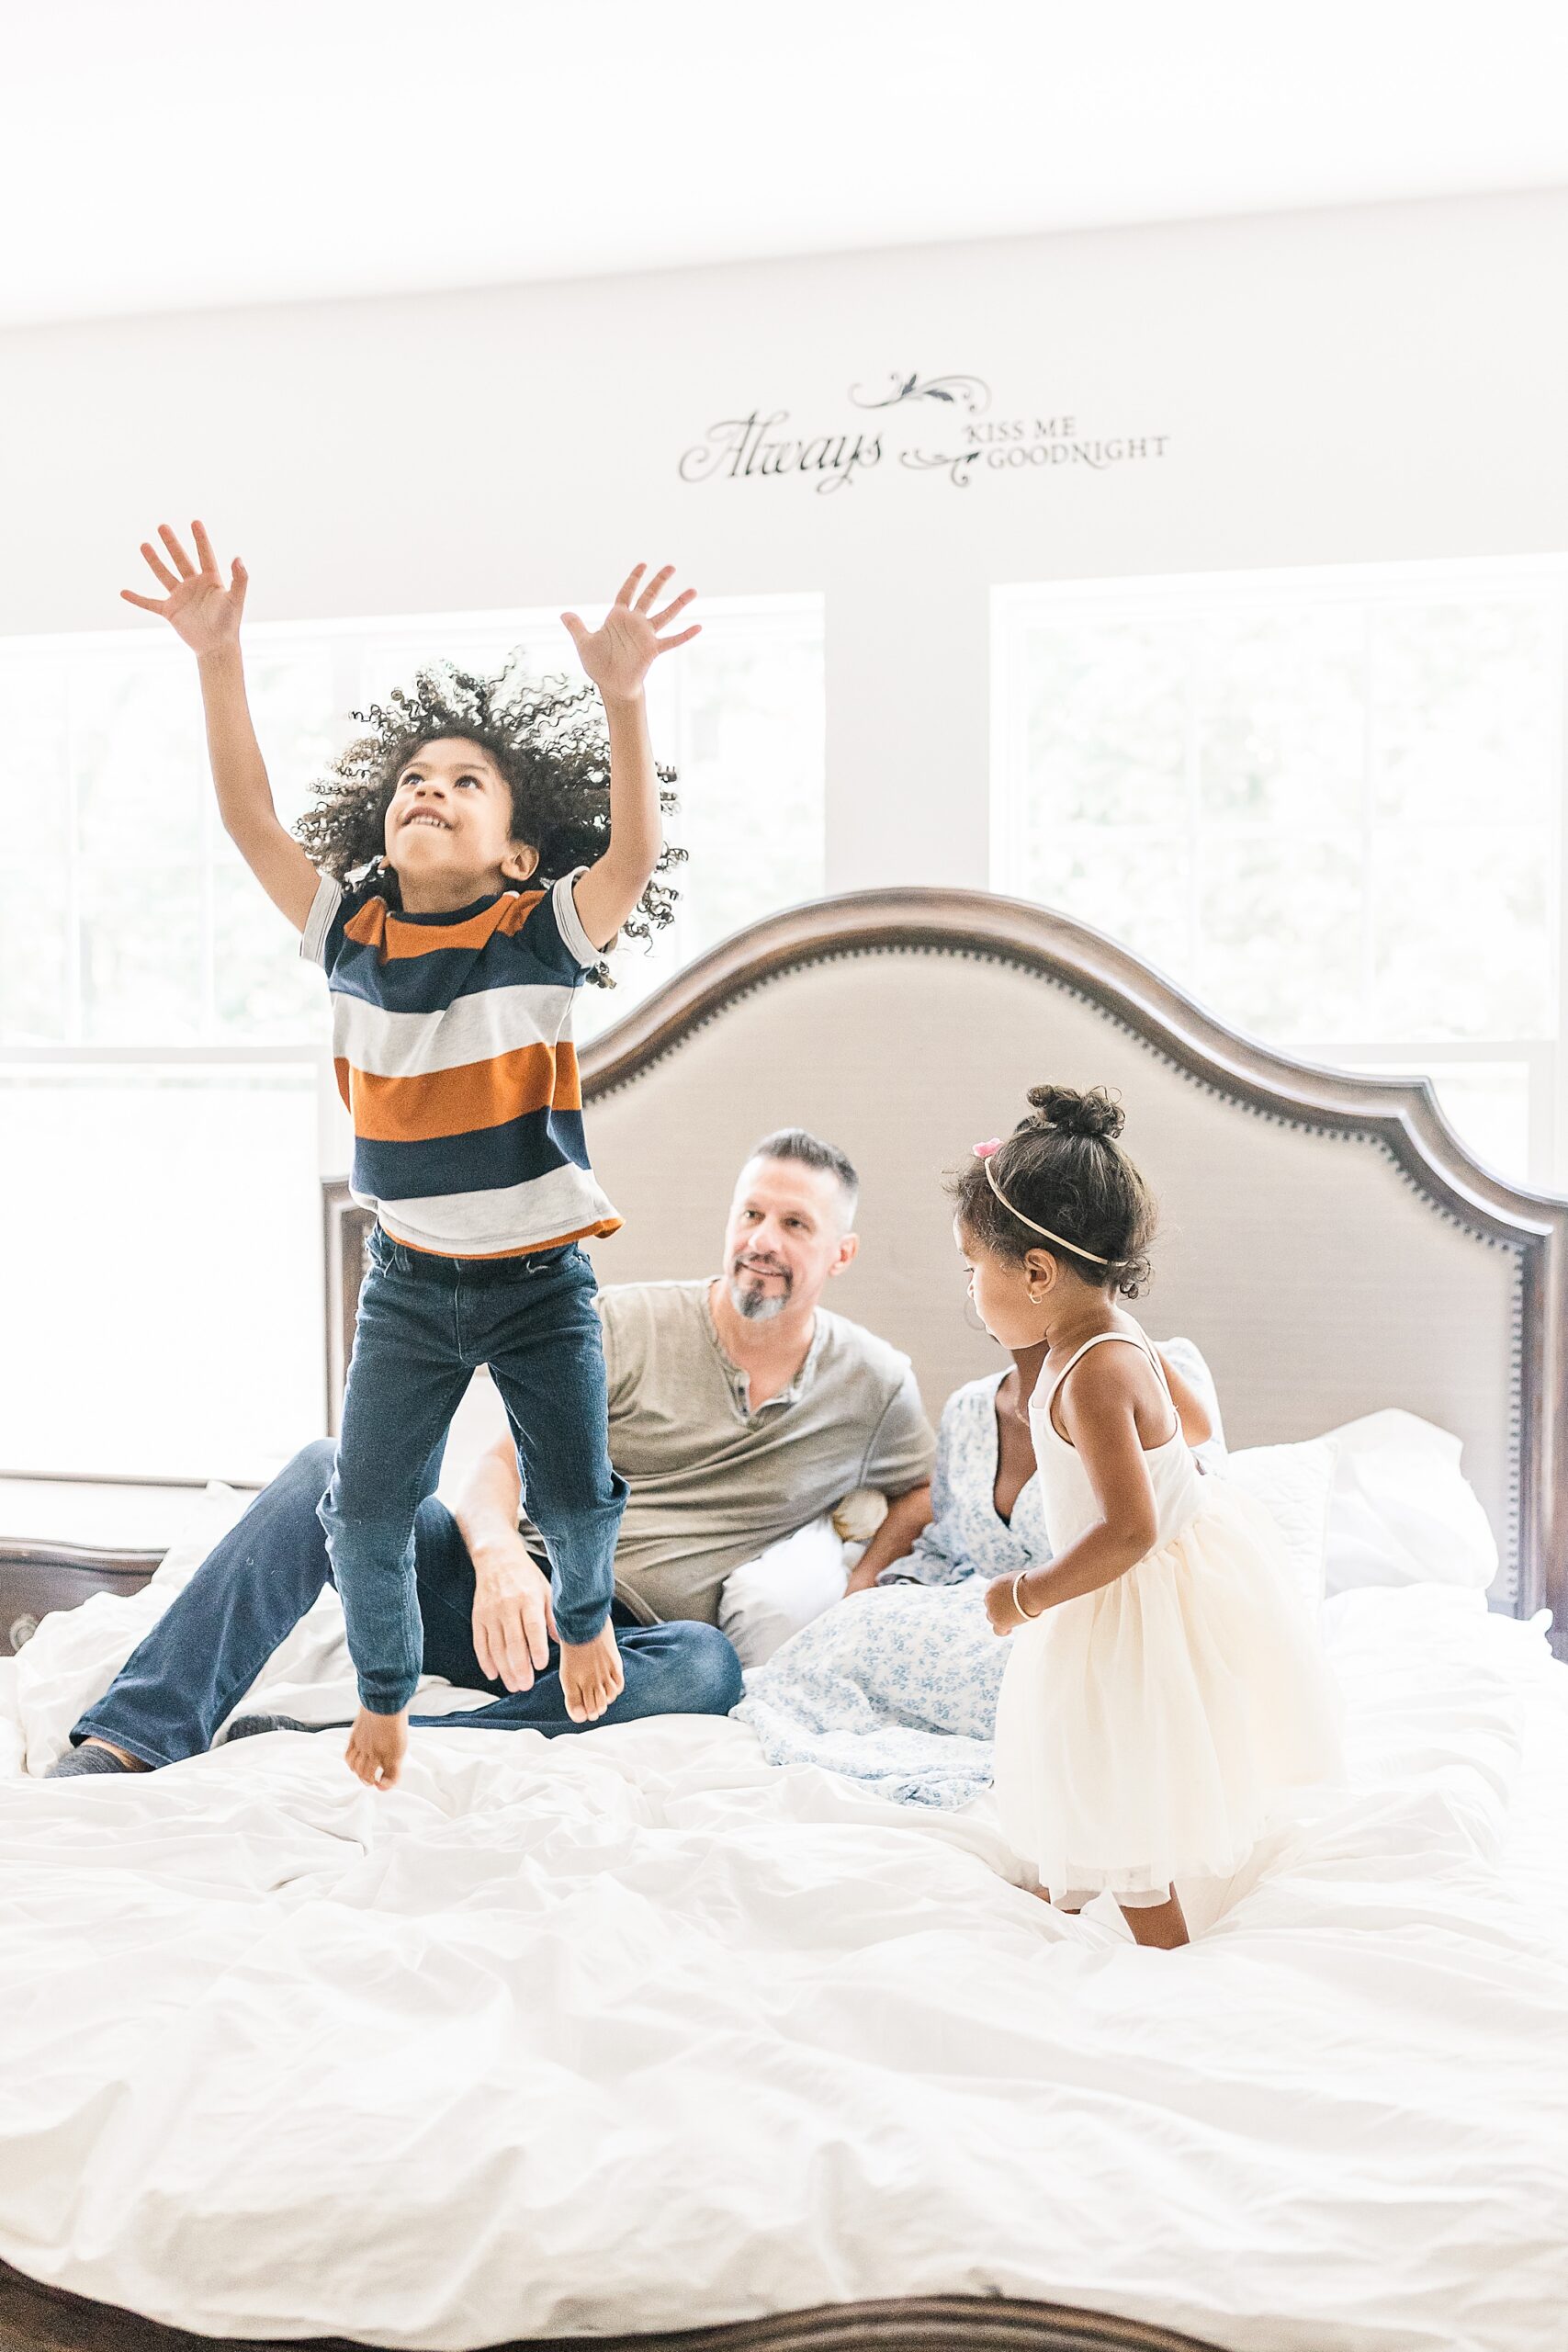 Maryland family photographer Christina Tundo Photography shares how to get more authentic images during your family photos